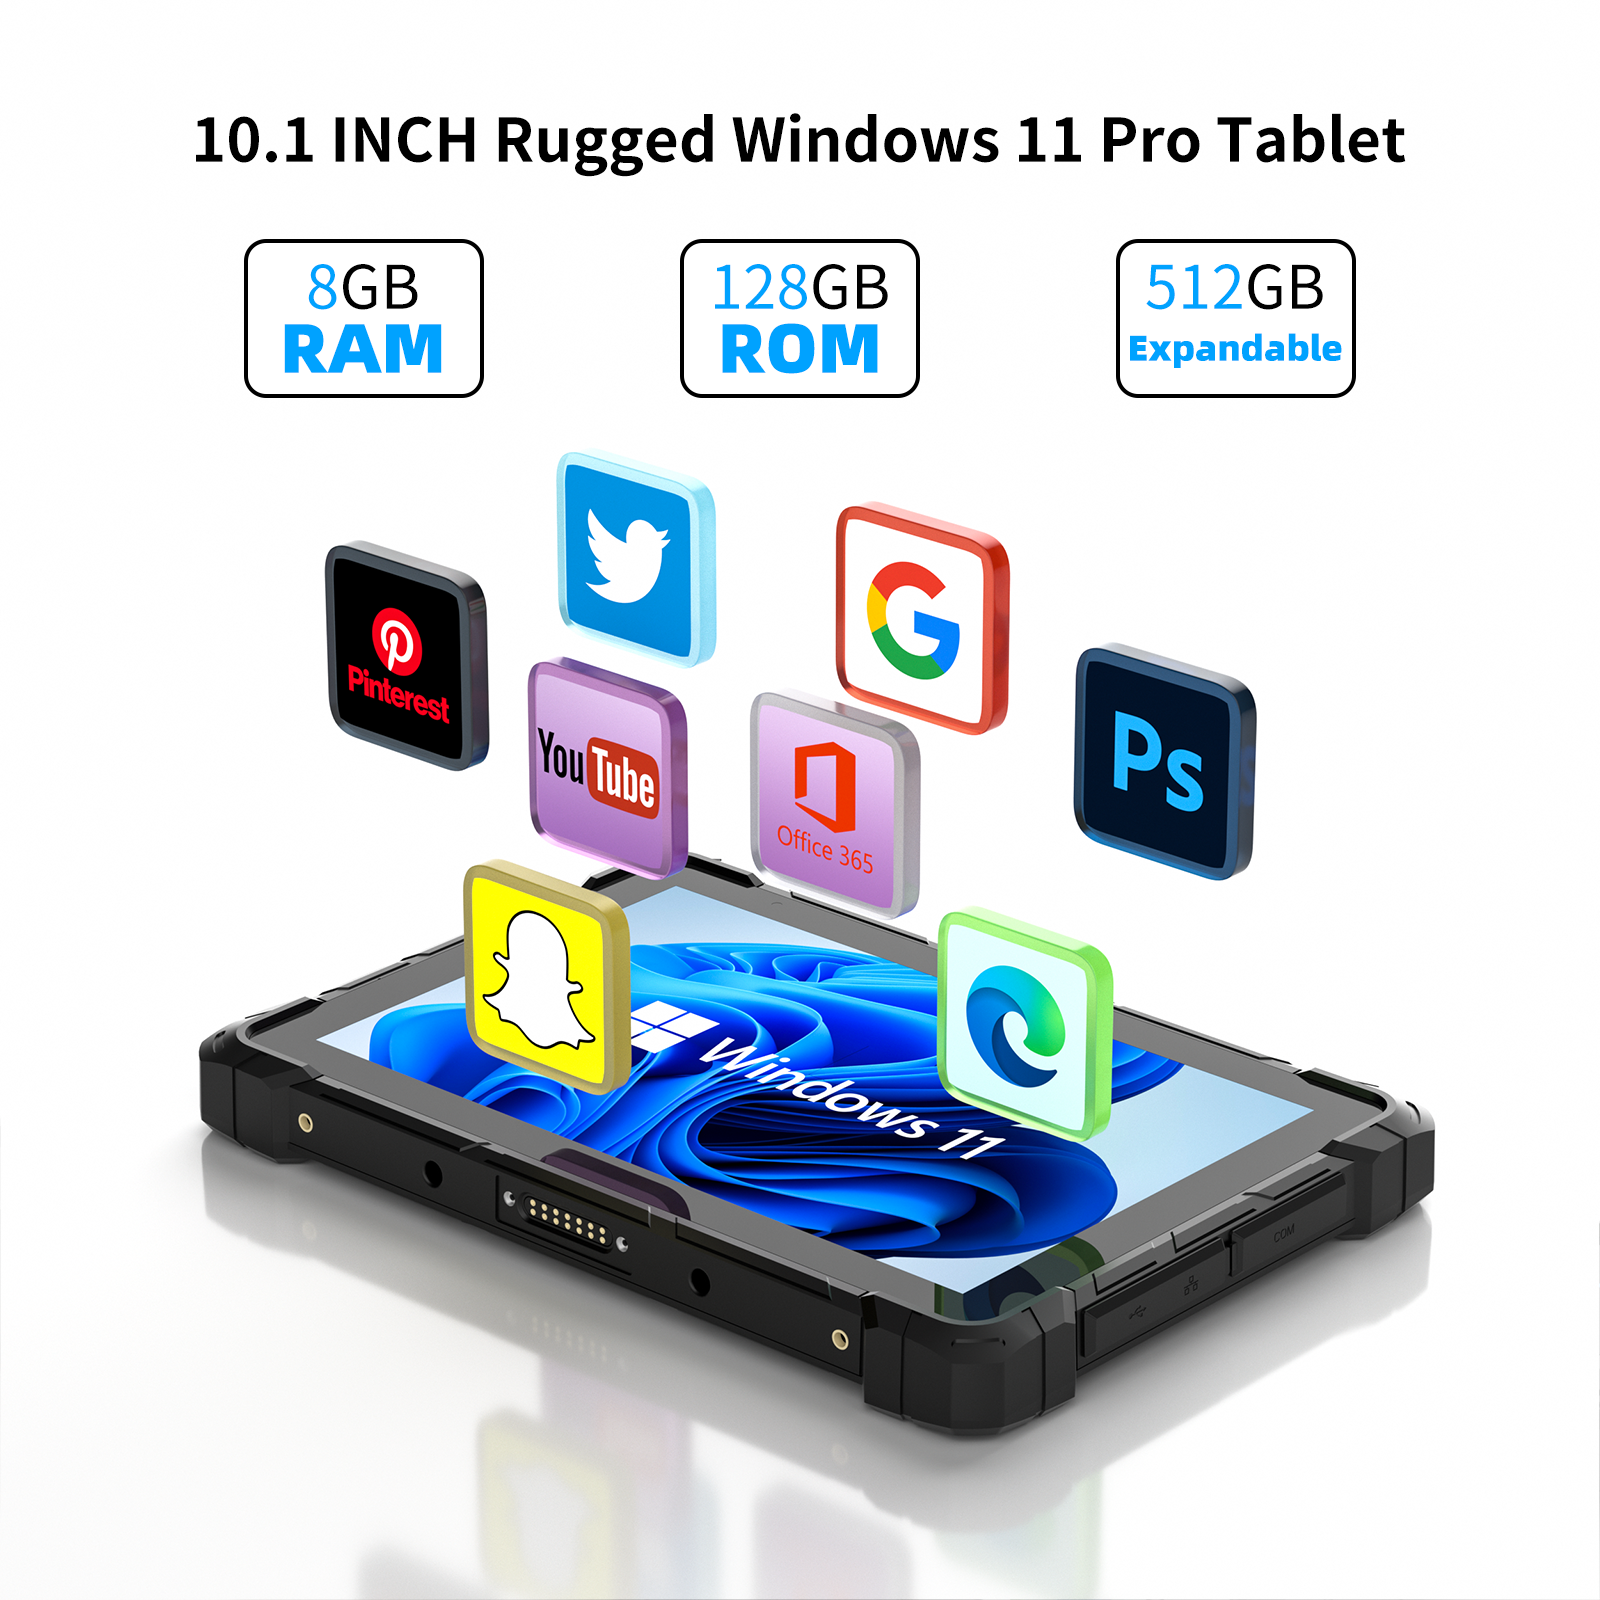 HiGole F7G 10.1-inch rugged Windows 11 Pro tablet has 512G of memory and supports interaction with all social software and apps on the market!